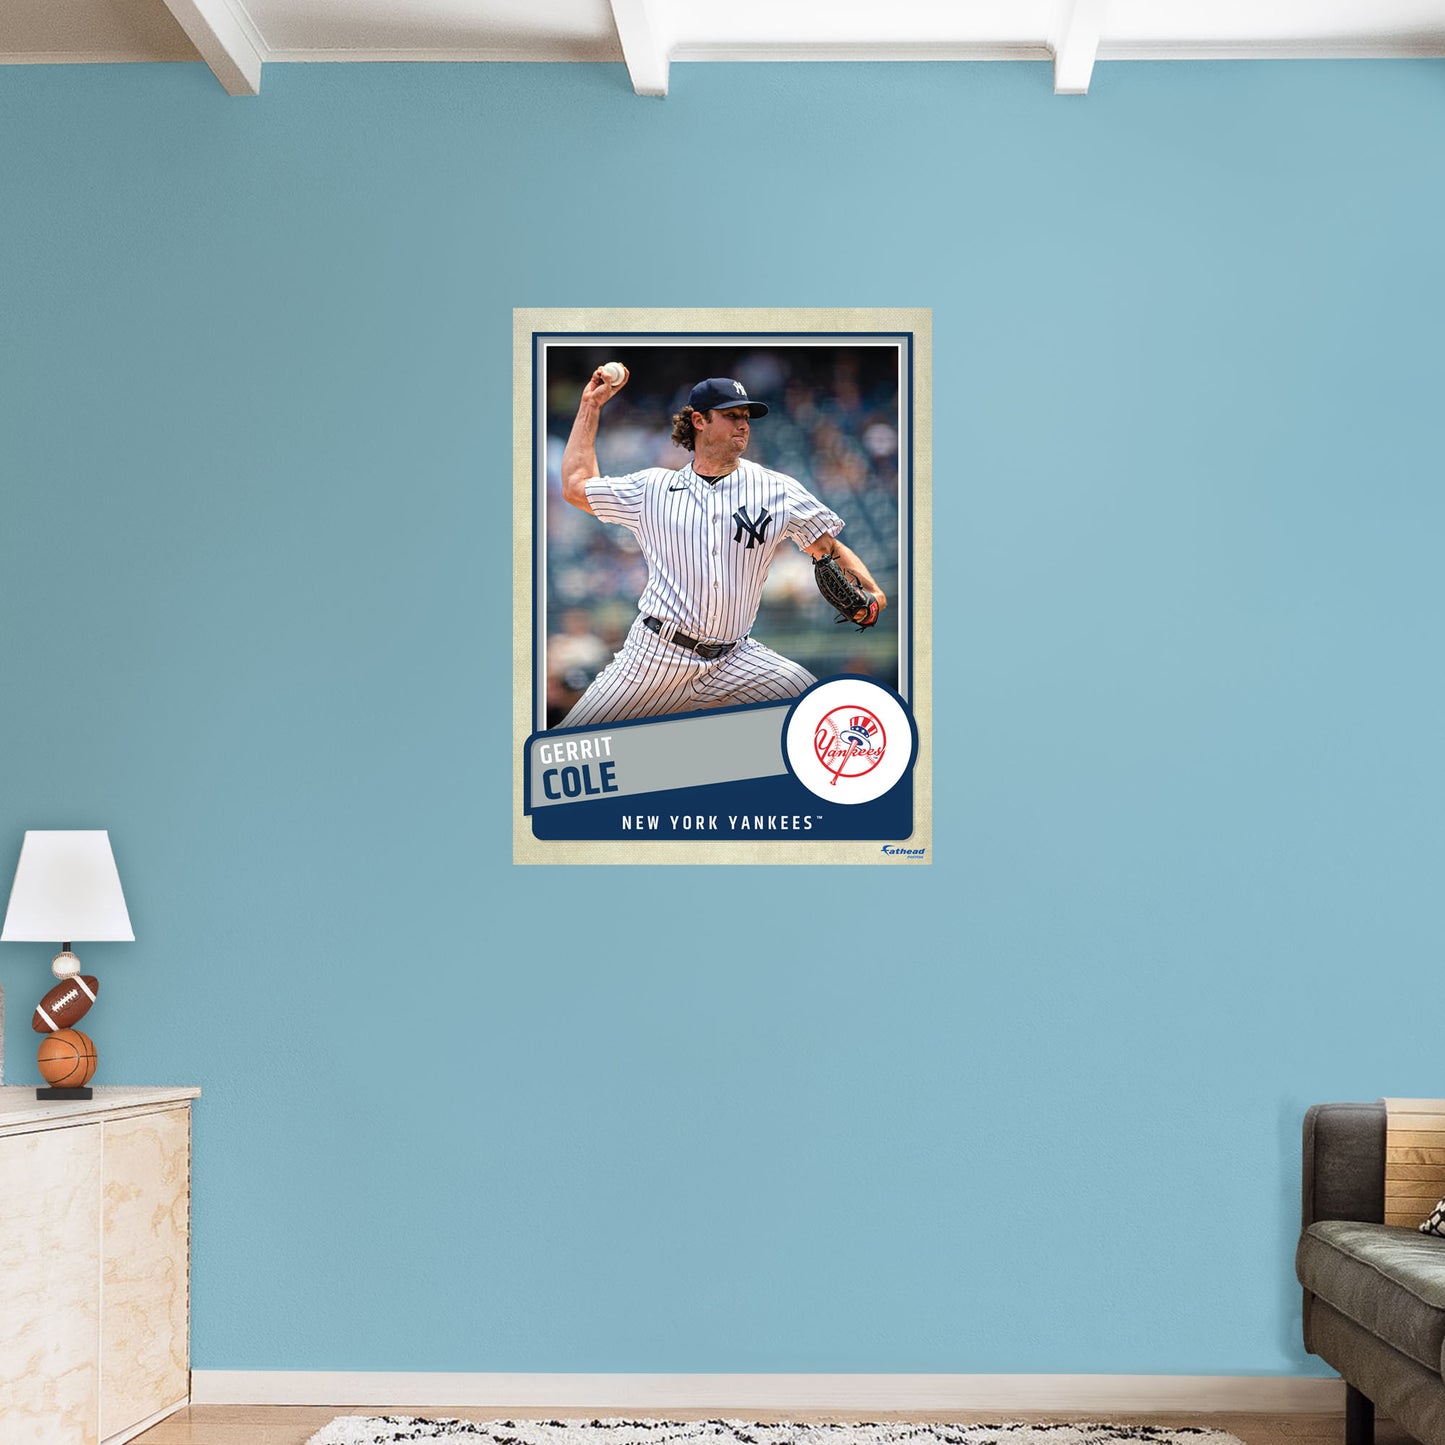 New York Yankees: Gerrit Cole  Poster        - Officially Licensed MLB Removable     Adhesive Decal